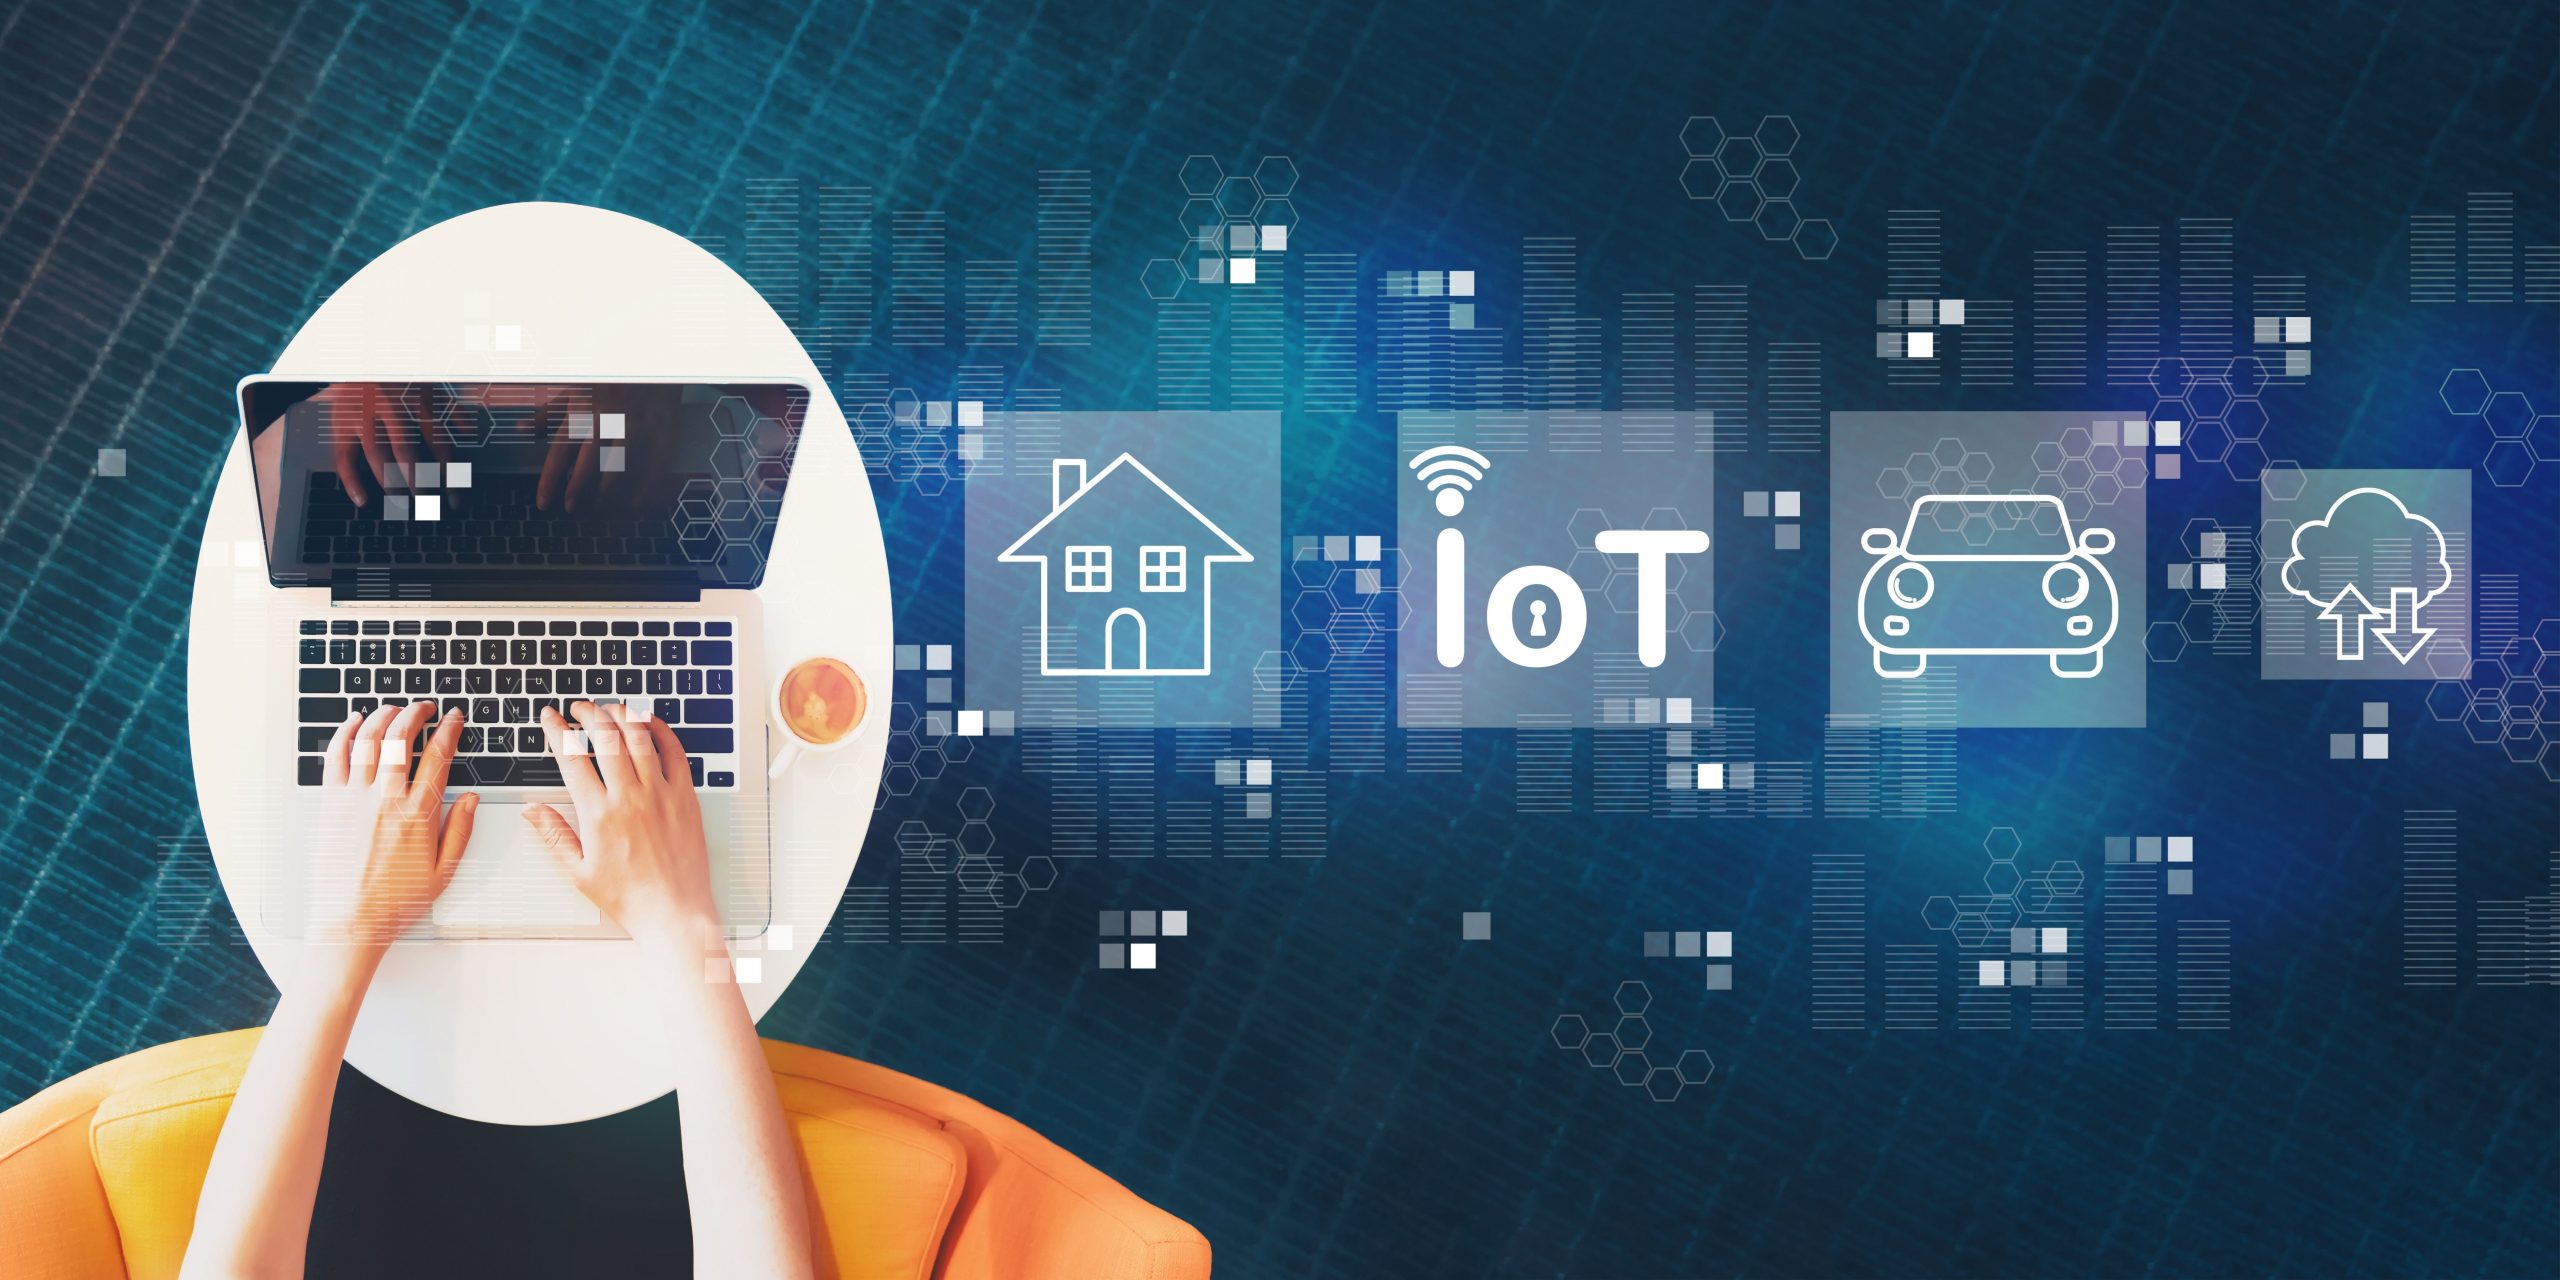 About Internet of Things